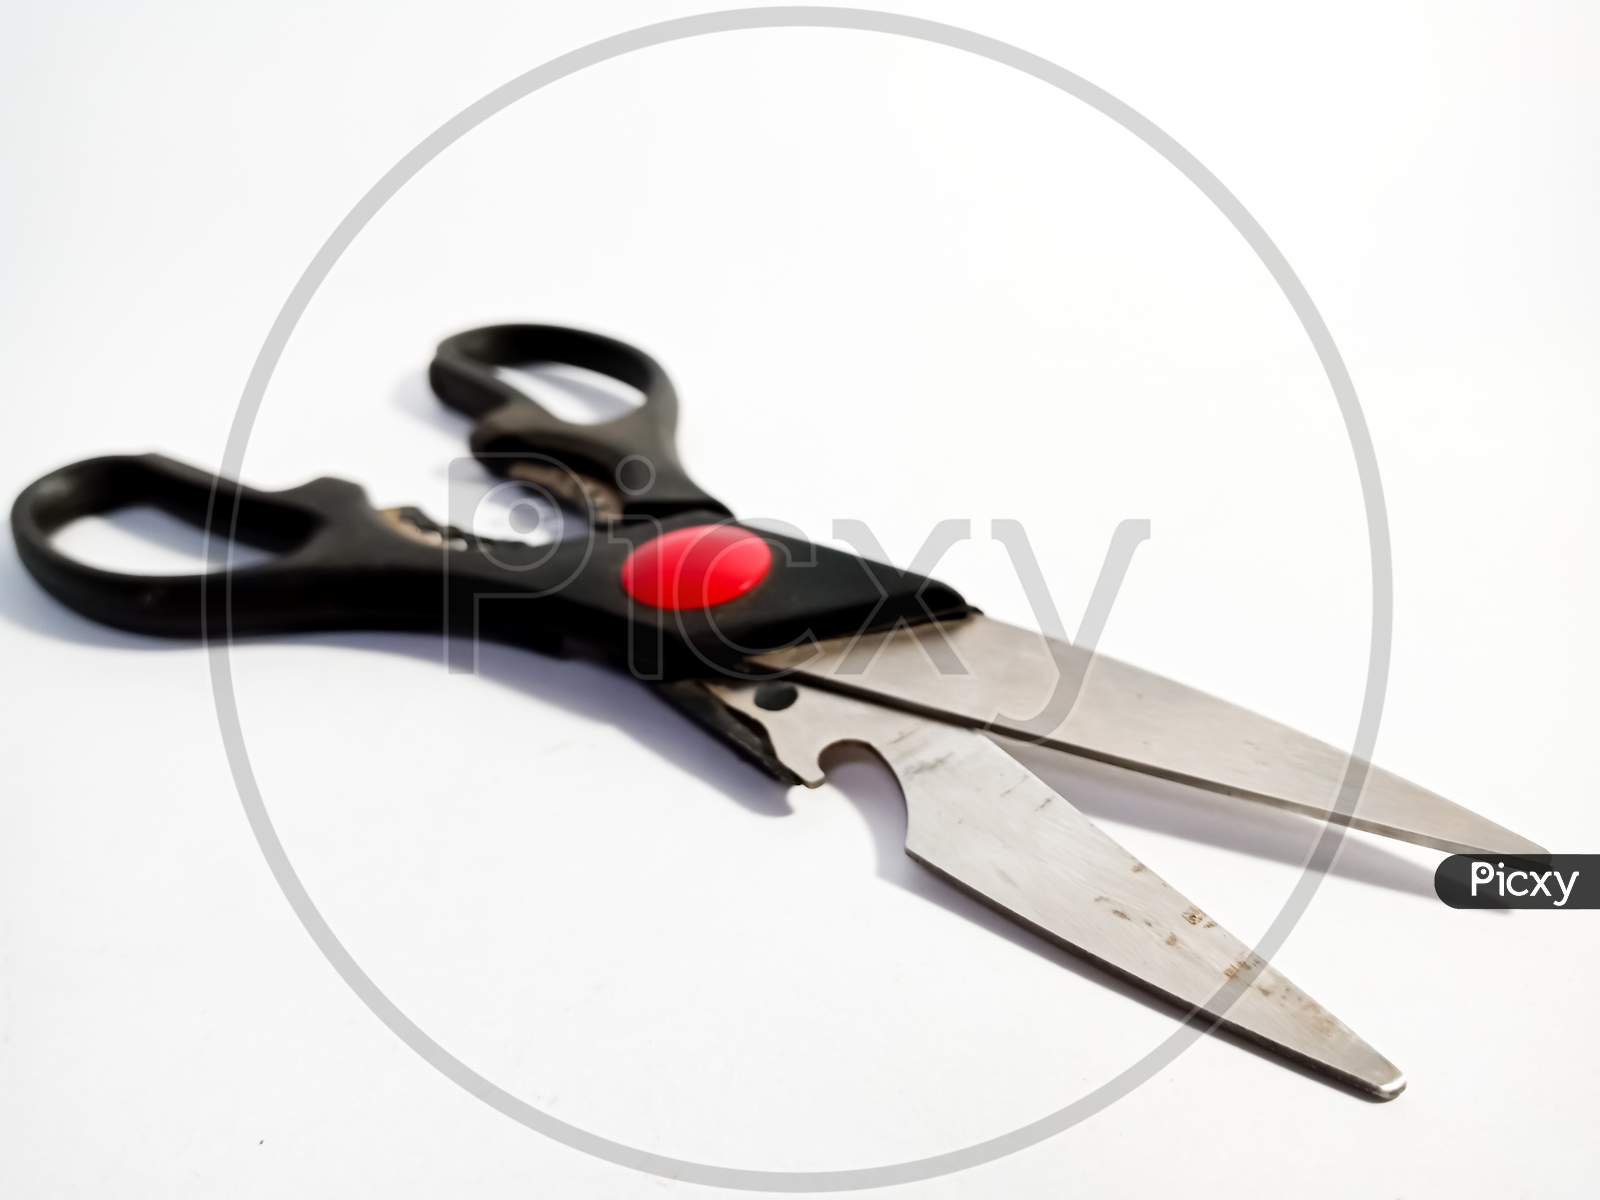 Scissors Isolated On White Background For Marketing And Branding Promotional Purpose Background.